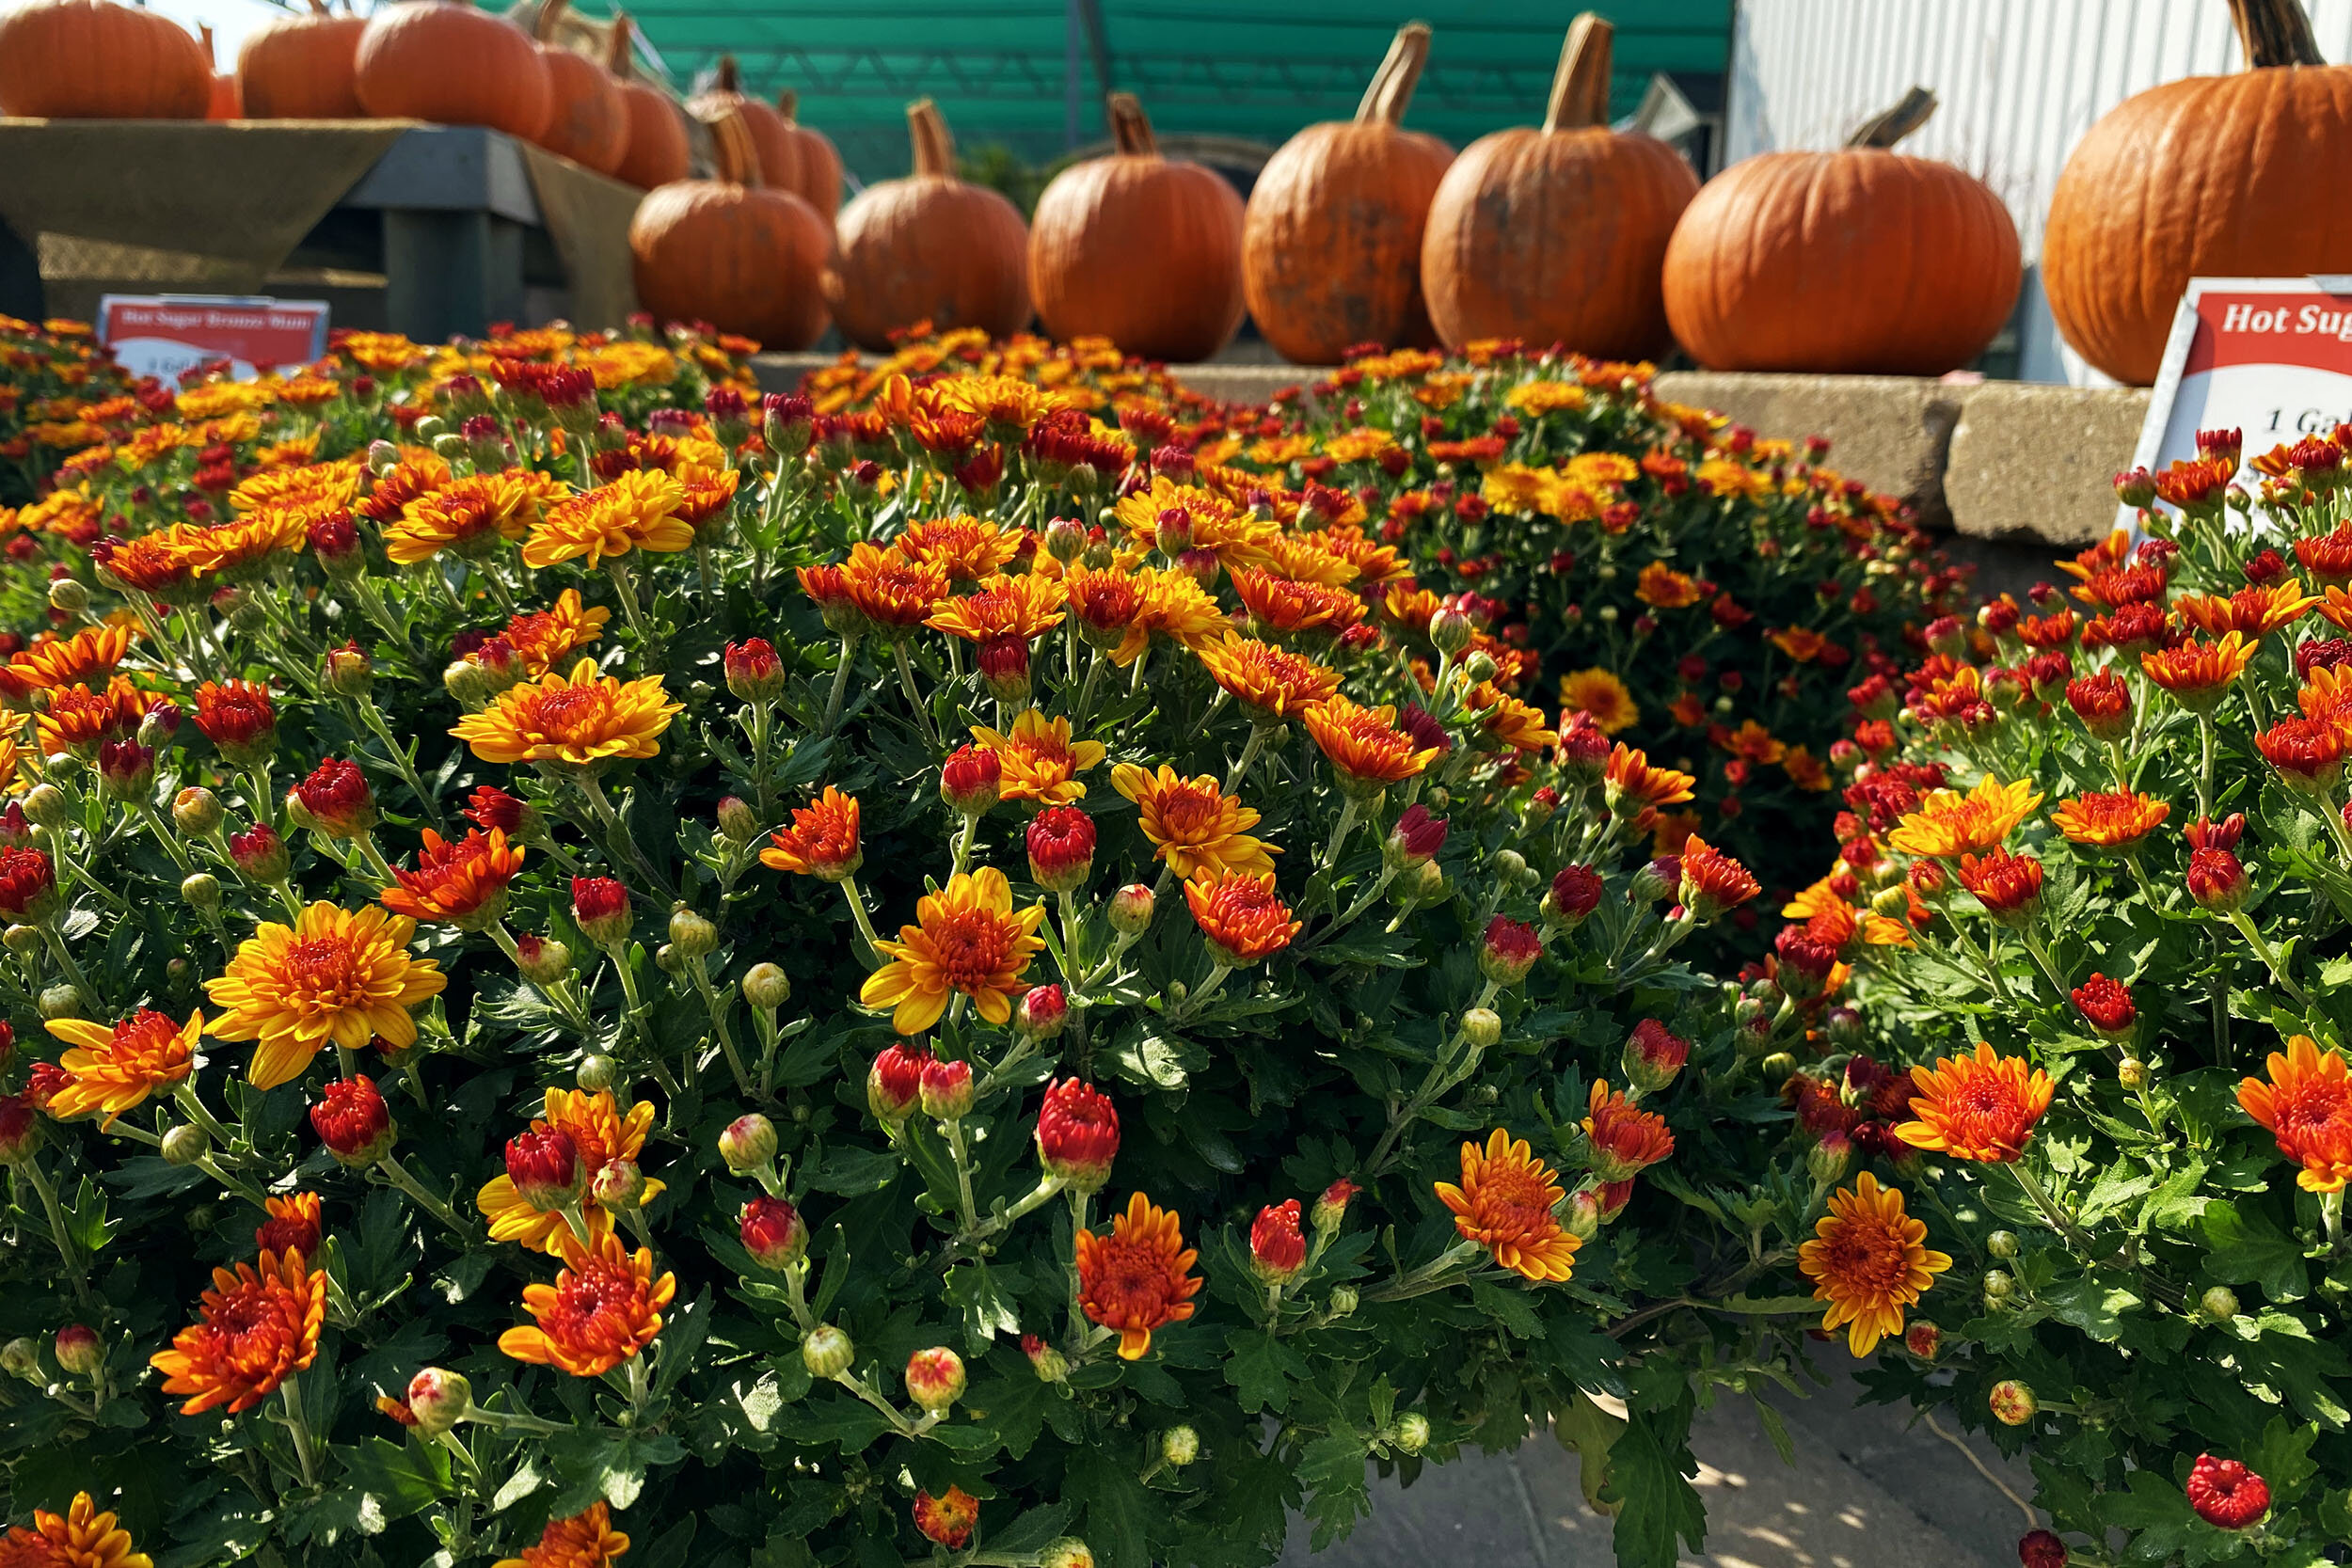 Mums hold their color until frost